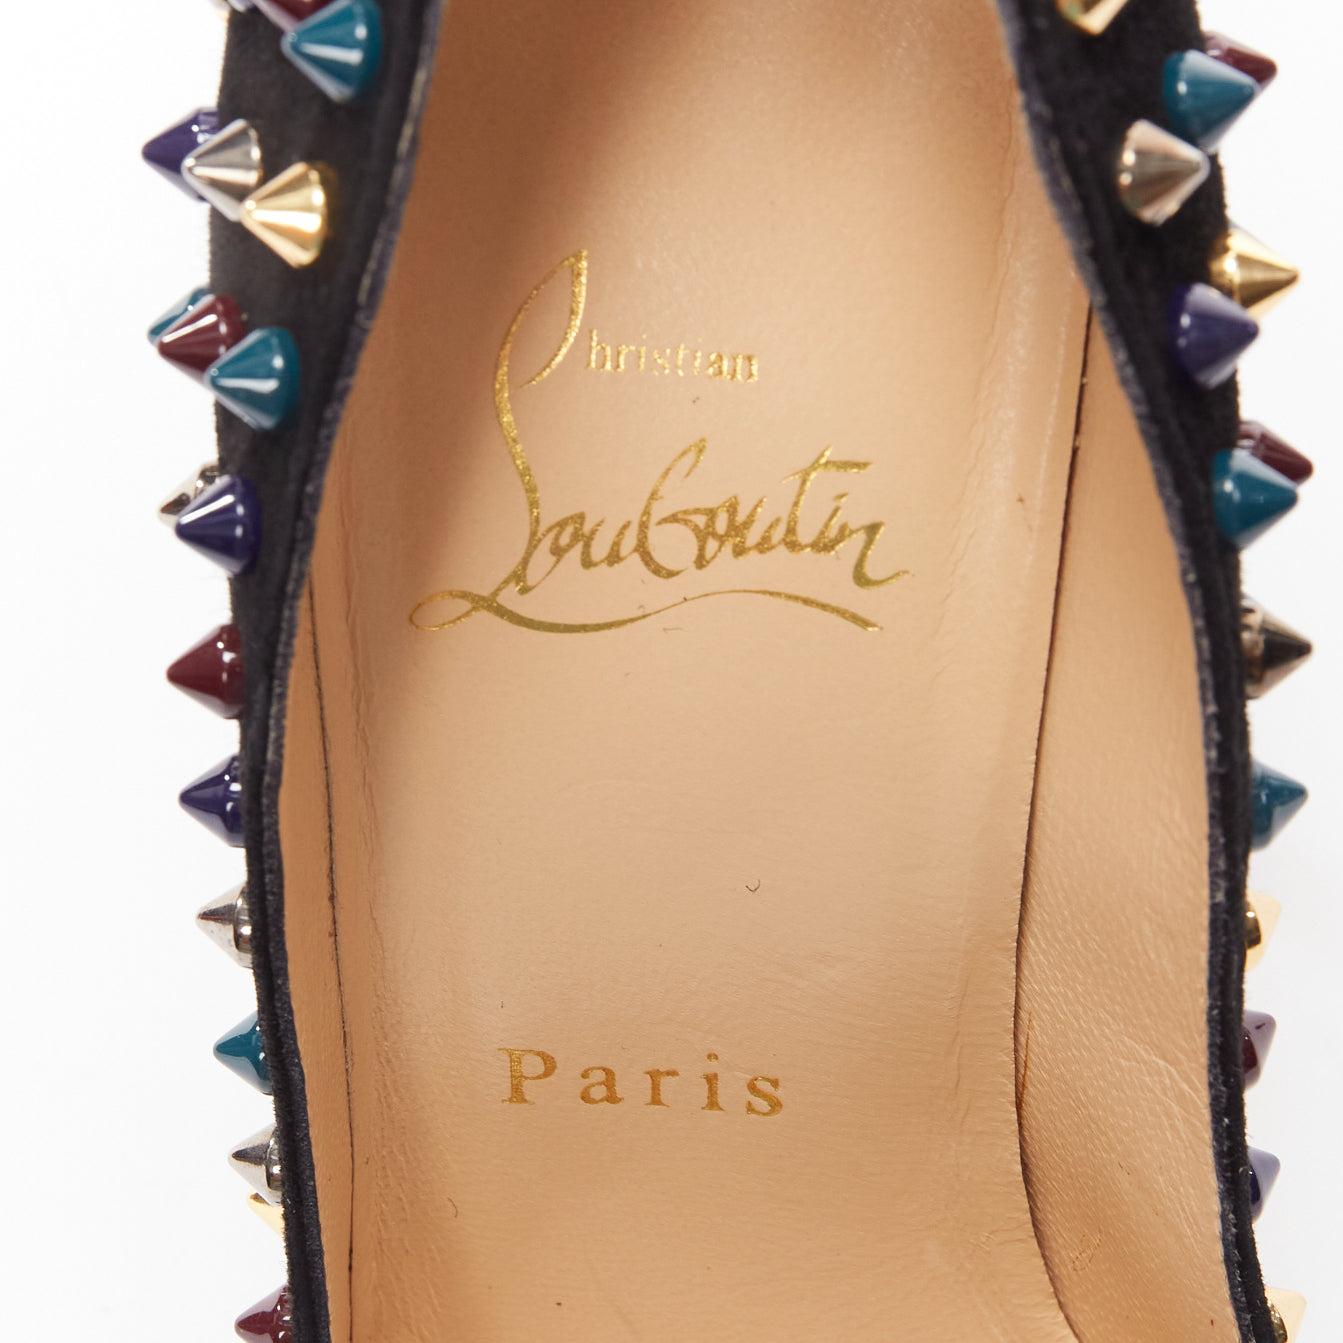 CHRISITAN LOUBOUTI Follies Spikes black suede jewely tone spike pigalle EU36 For Sale 5